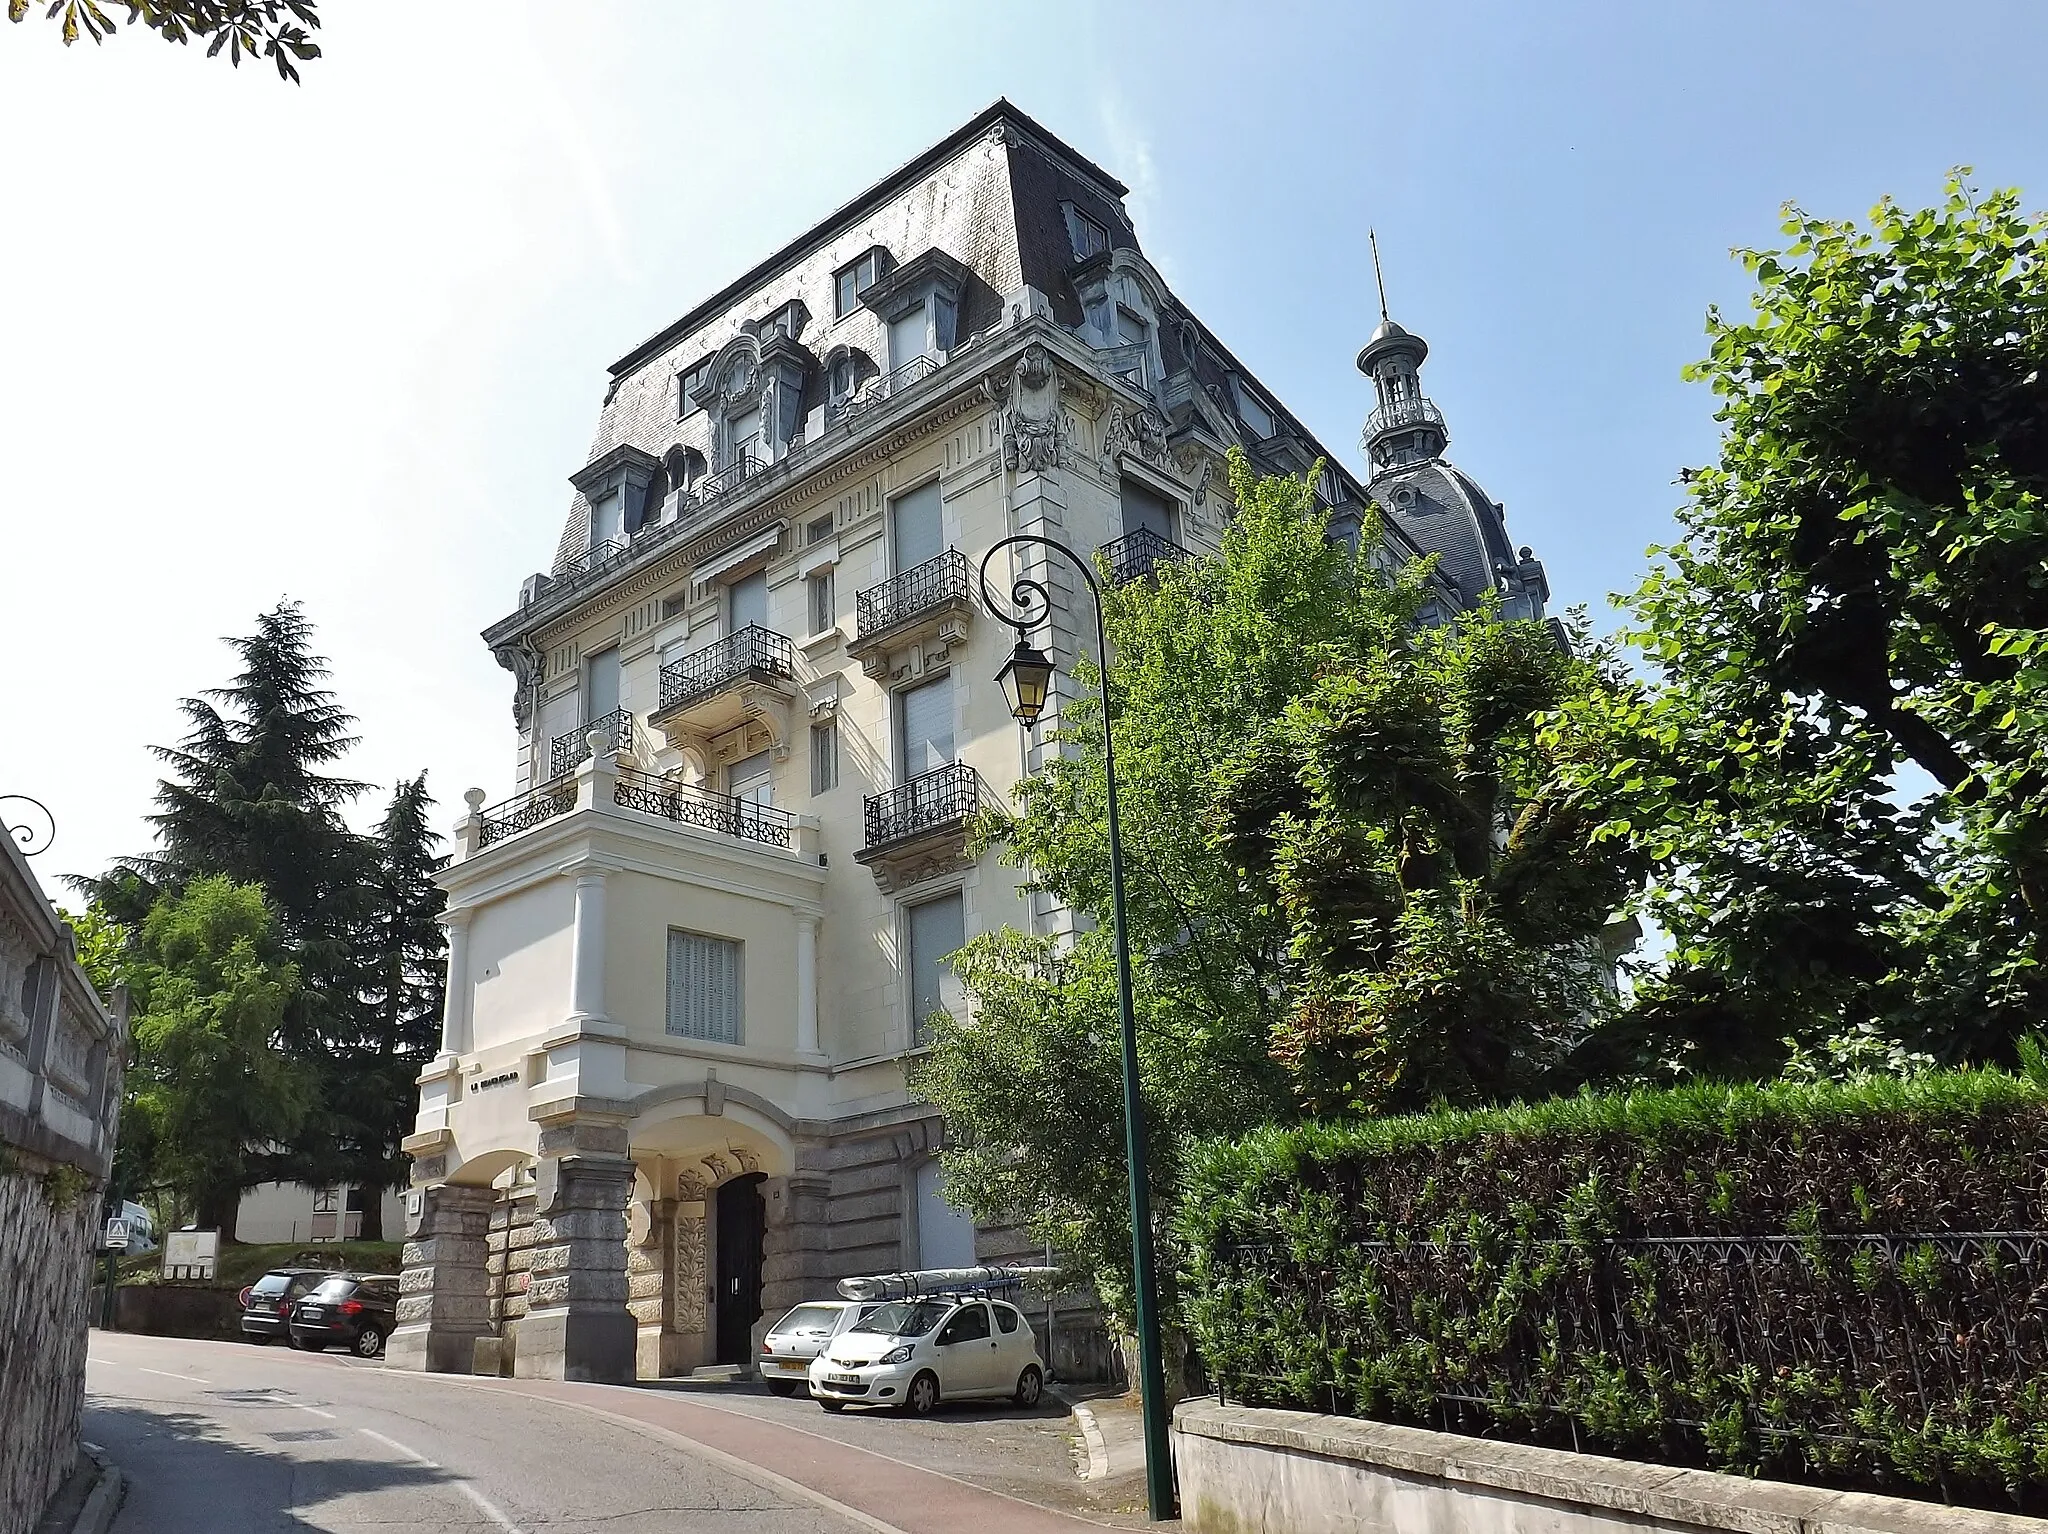 Photo showing: Sight of former Hôtel Excelsior (known today as Résidence Beauregard), in city of Aix-les-Bains, in Savoie, France.